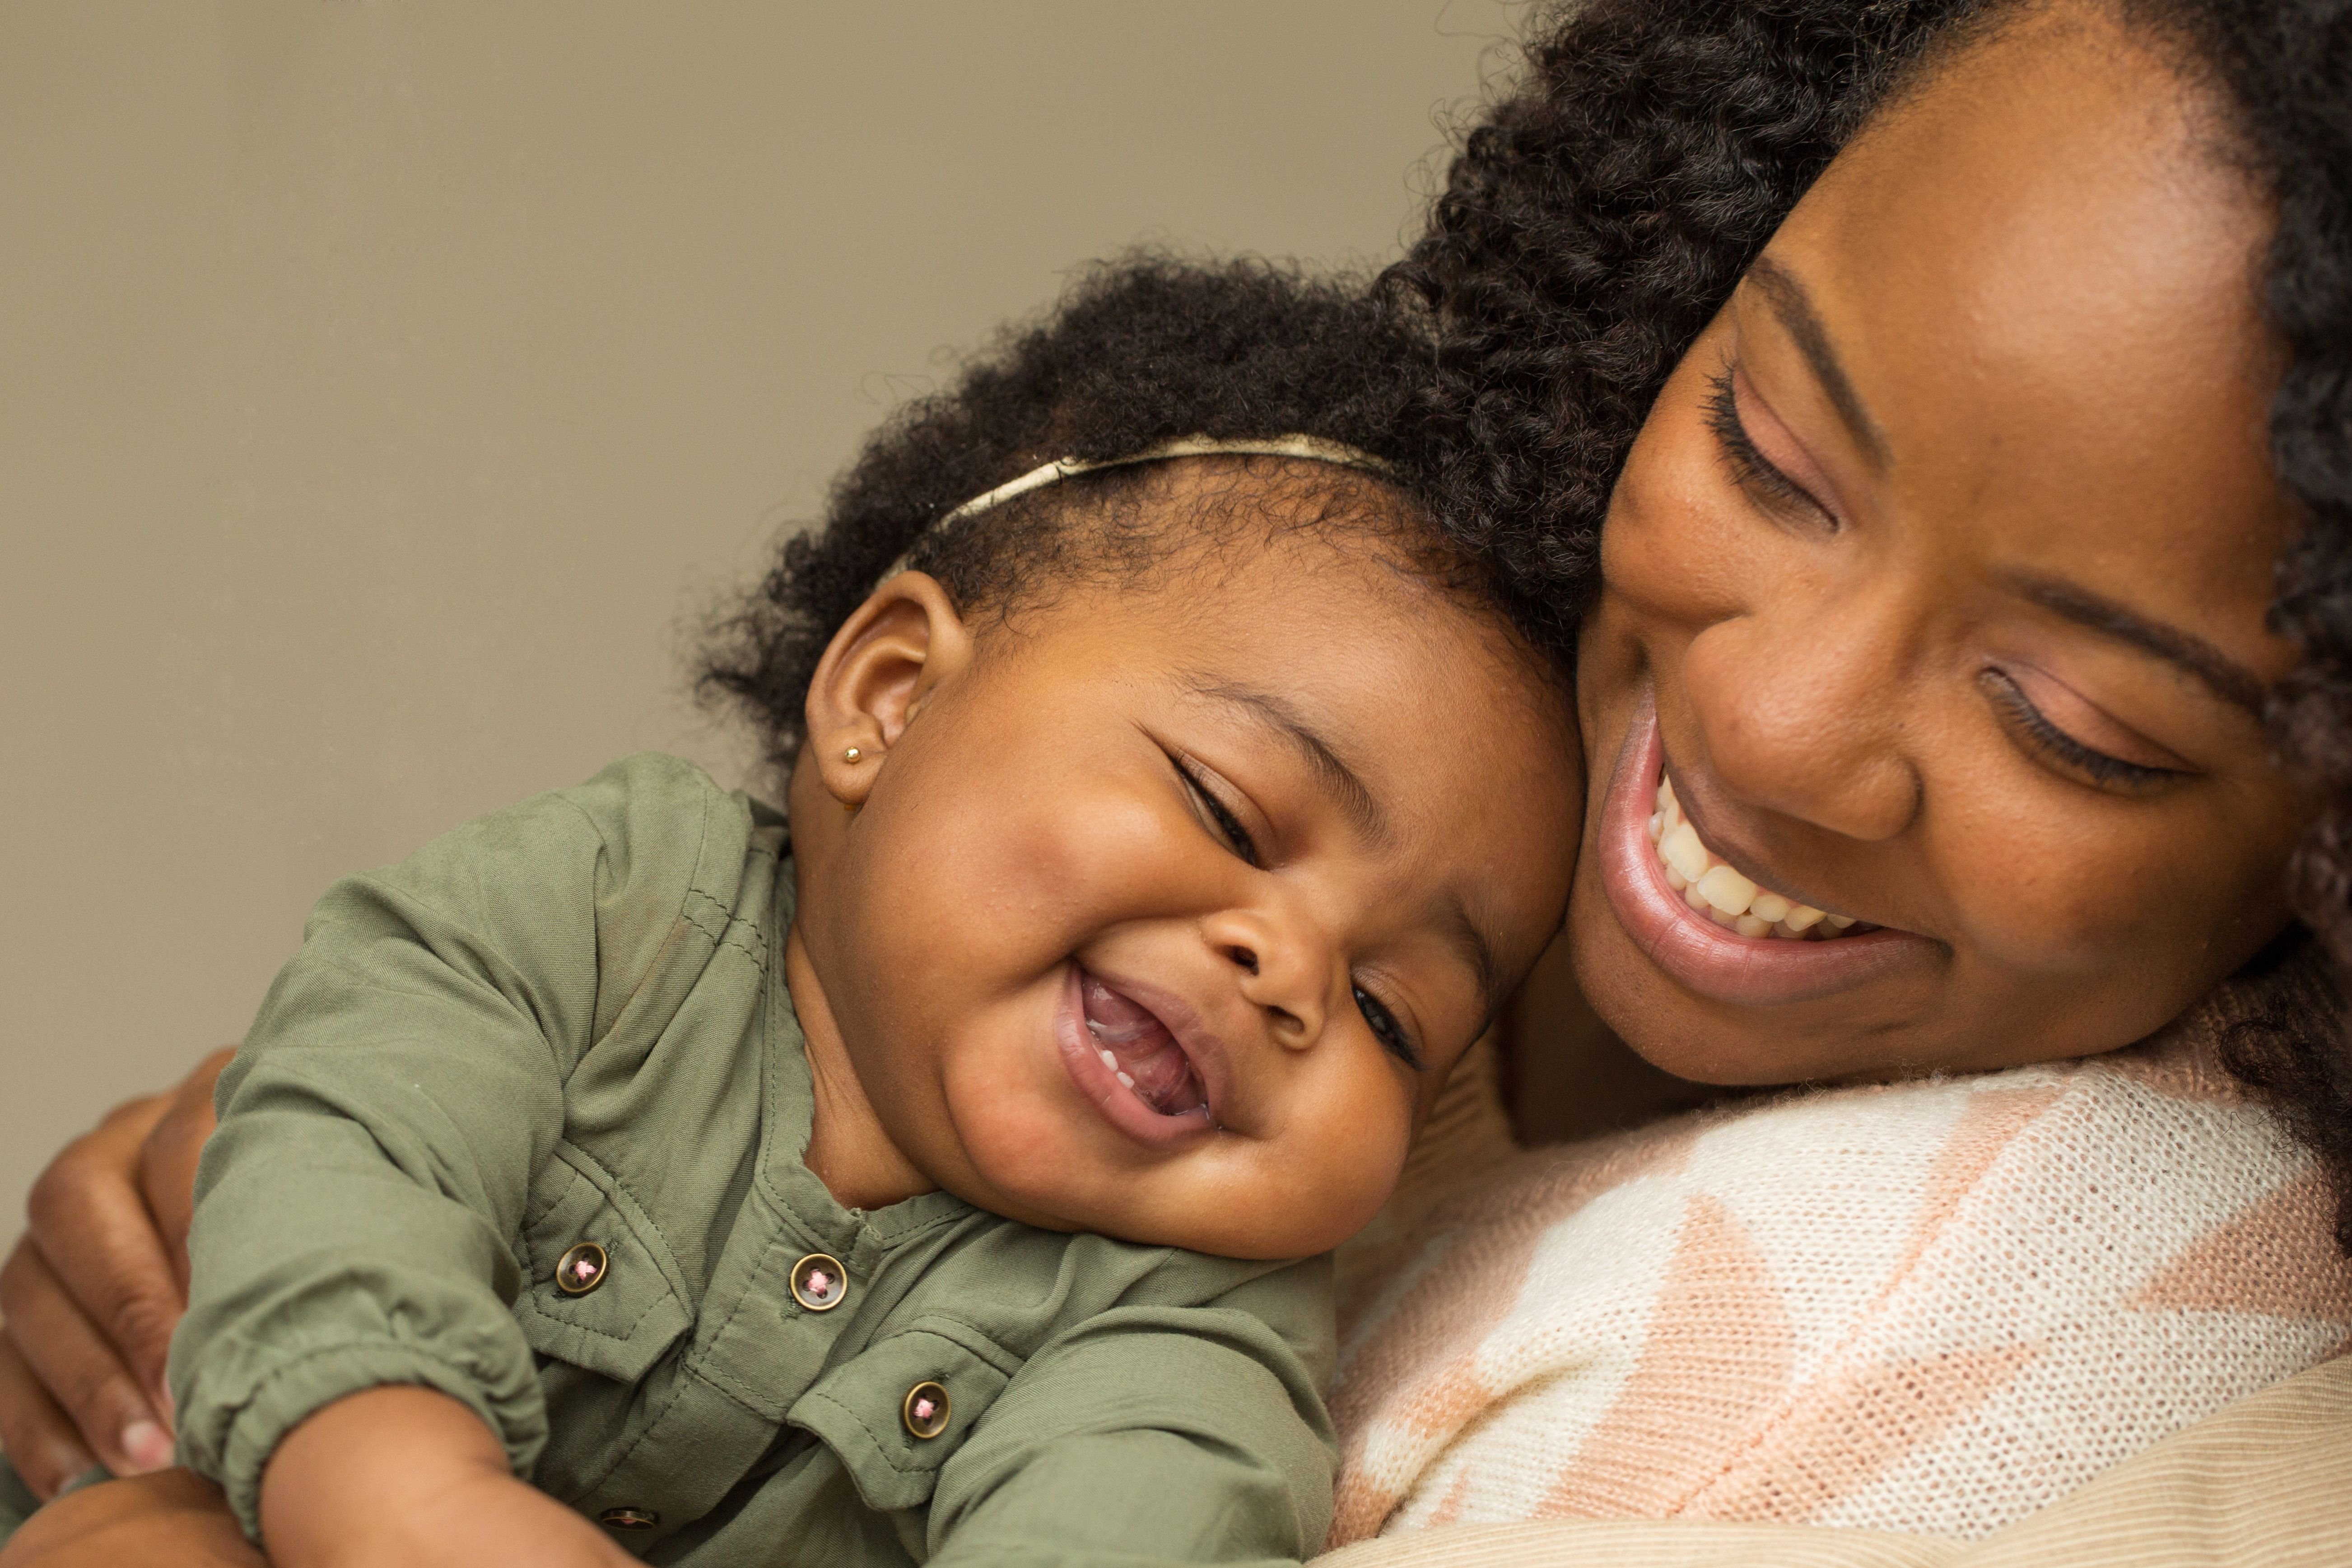 A woman and baby cuddling and smiling. │ Source: Shutterstock